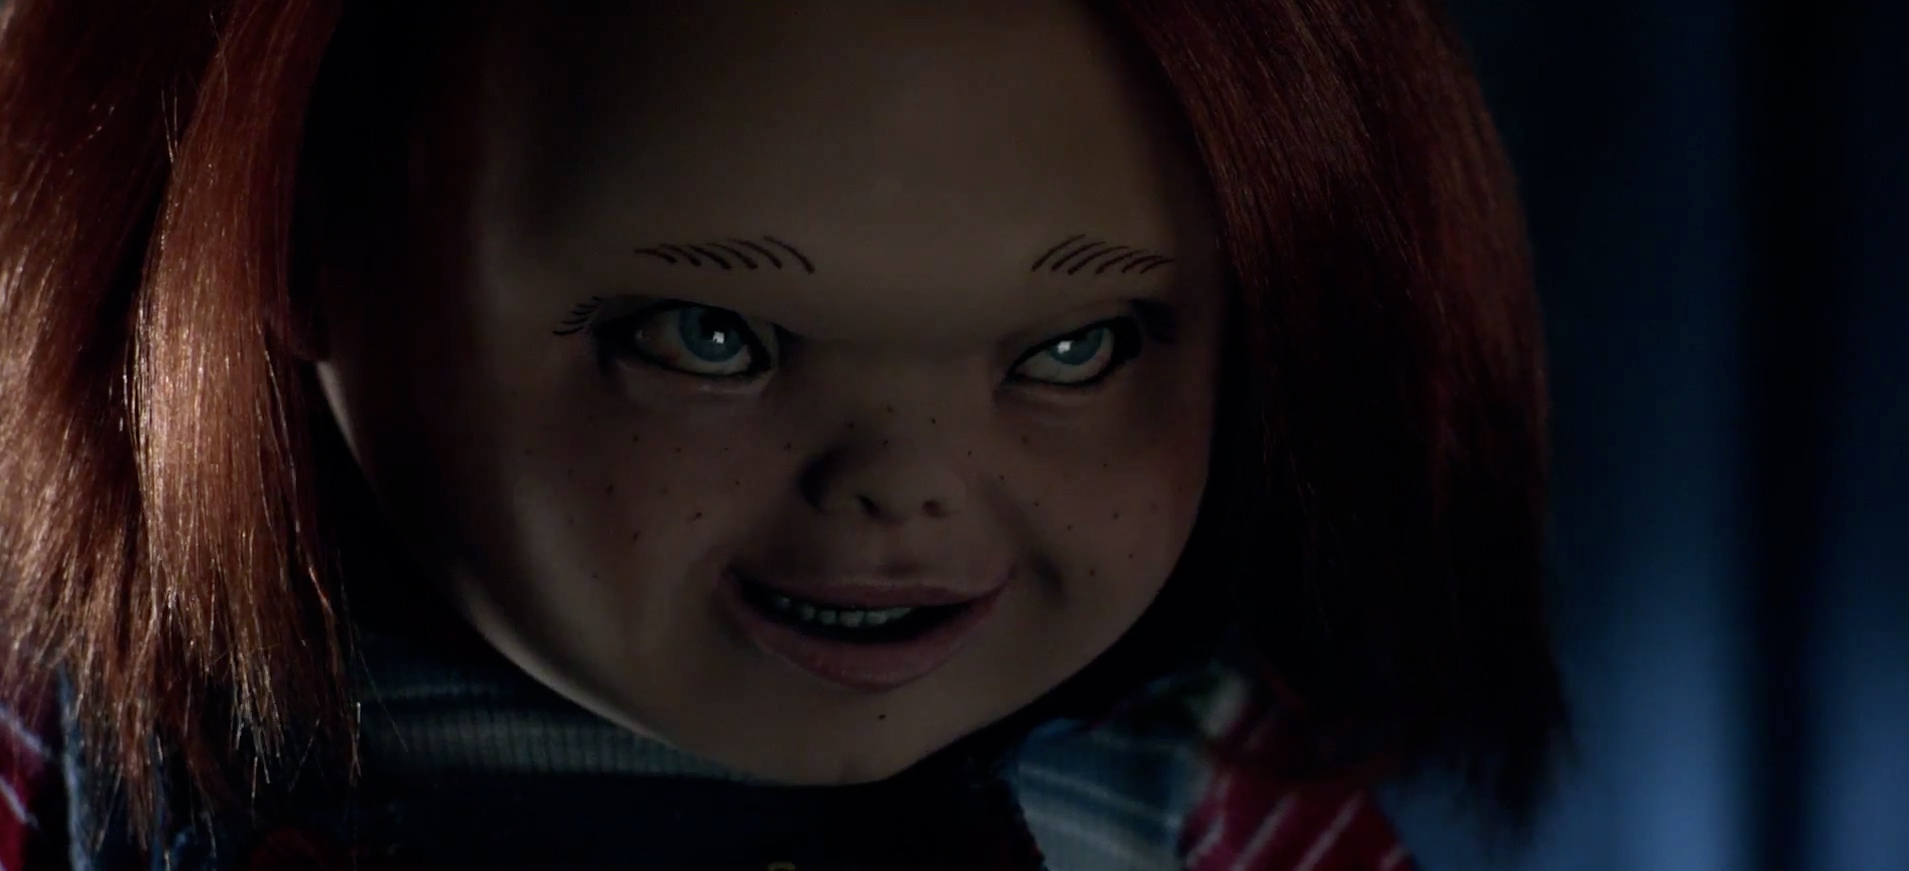 Archived: Review: Curse of Chucky (2013) - archived